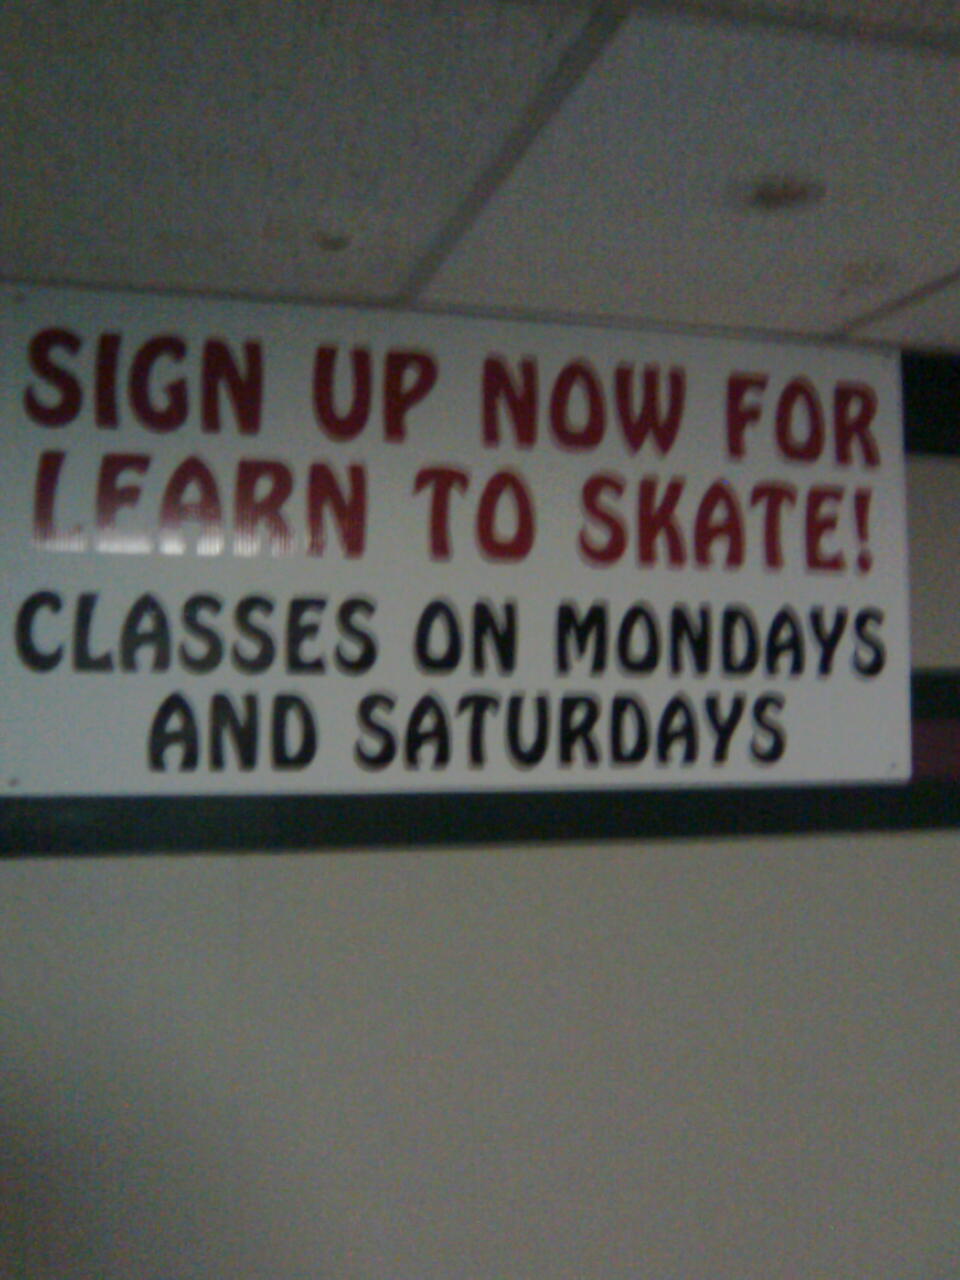 There should be another sign next to it that says "Sign up now for learn to English speaking"